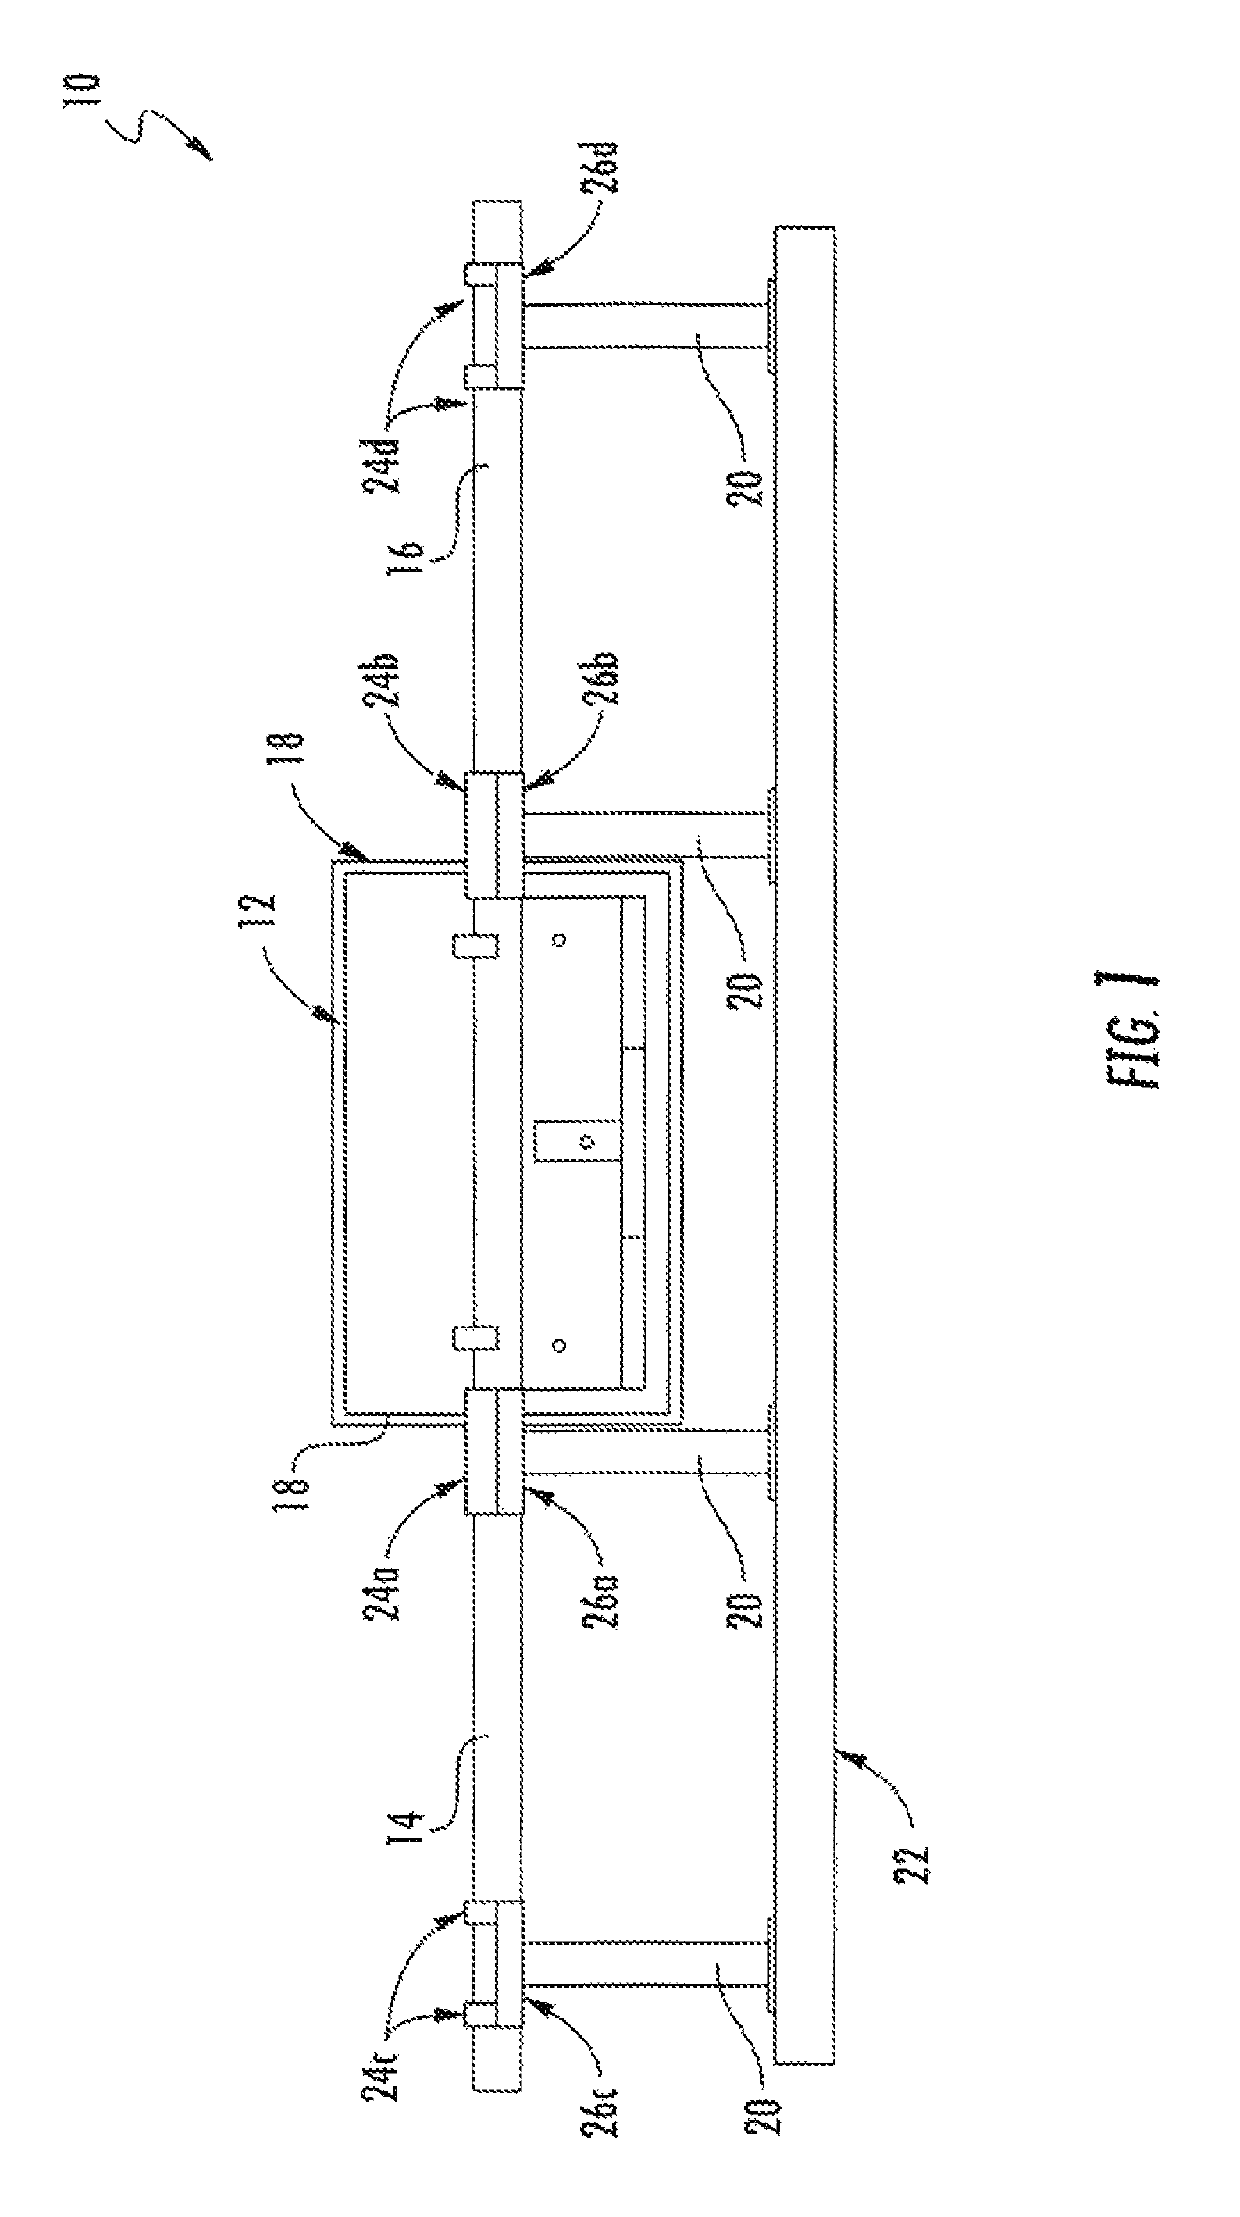 Apparatus and methods for determining gravity and density of solids in a liquid medium